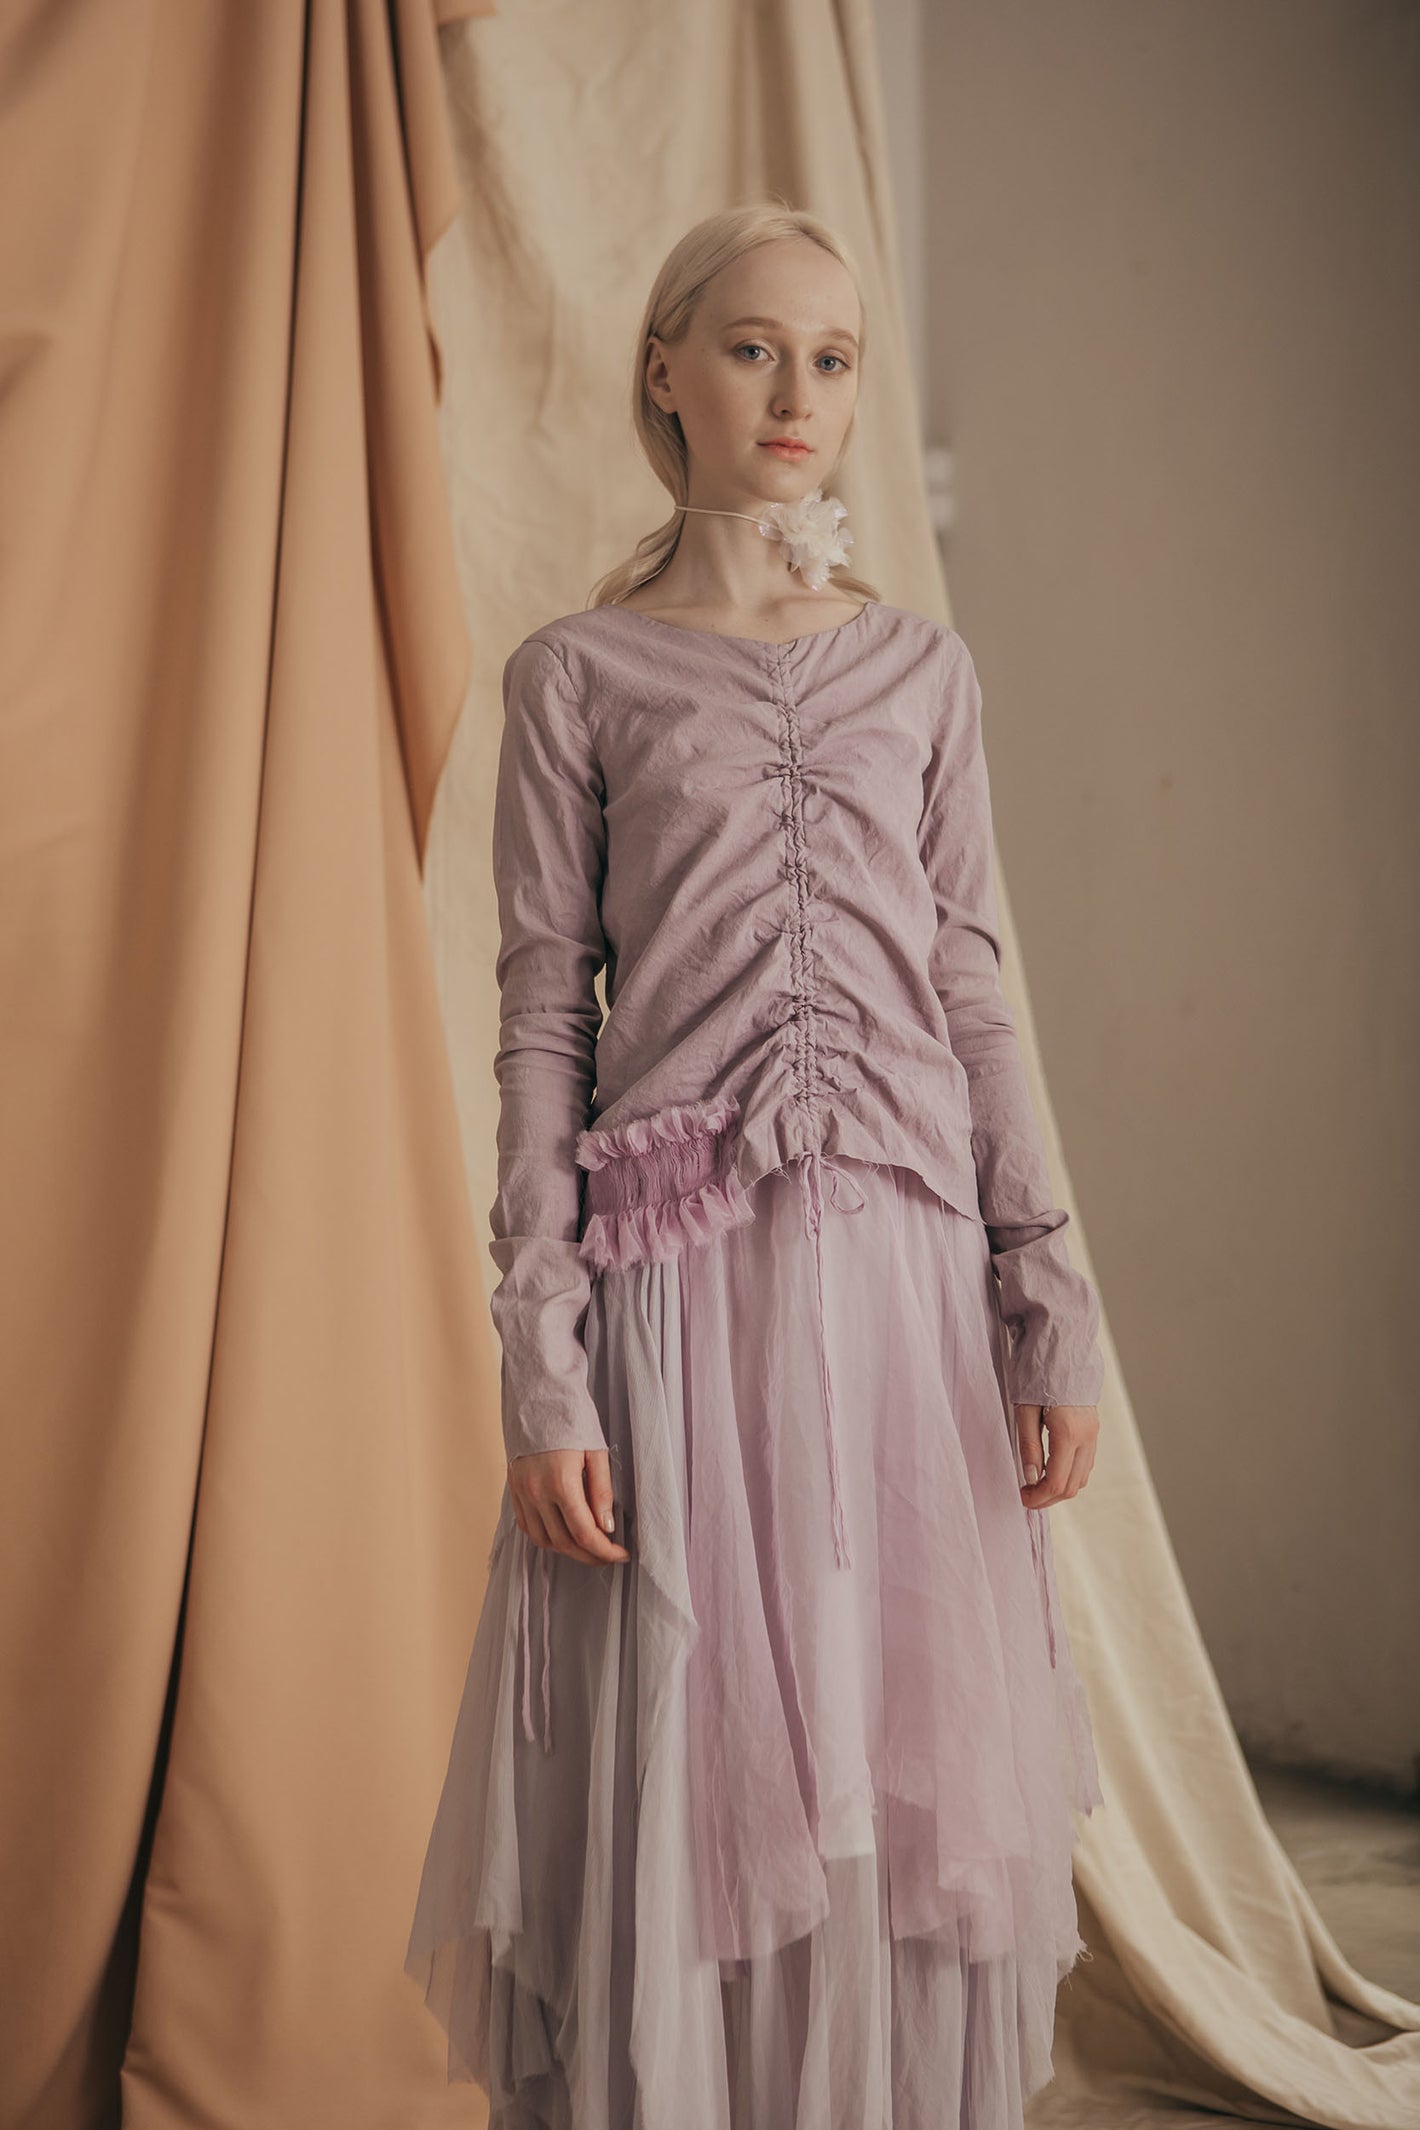 A Tentative Atelier SS20 Lookbook Womens lavender dress featuring a centrally ruched top with smocked appliqué and a ballerina skirt